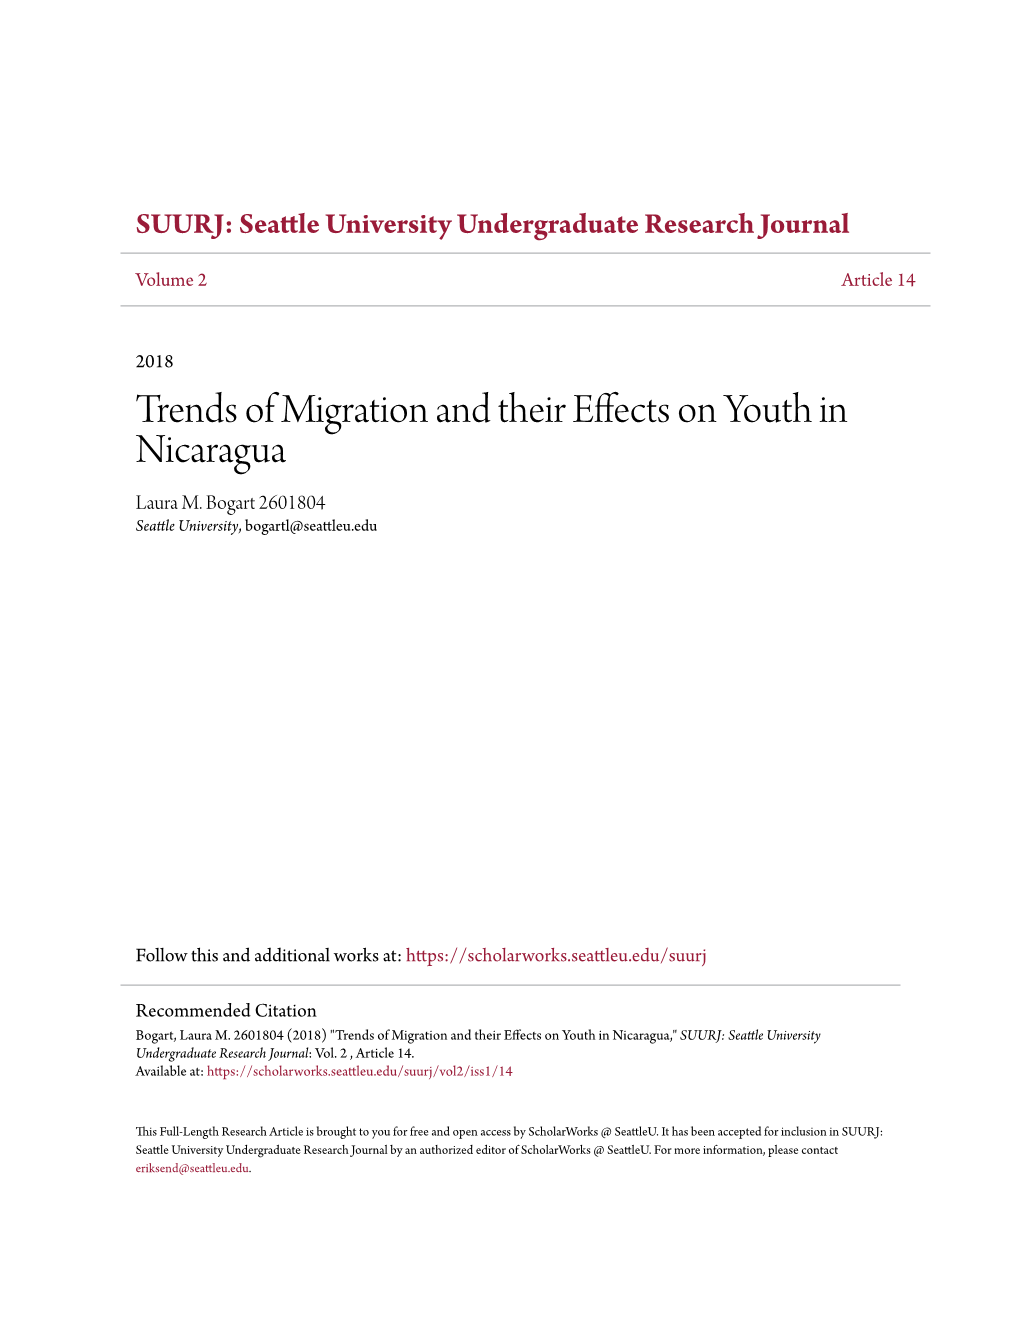 Trends of Migration and Their Effects on Youth in Nicaragua Laura M